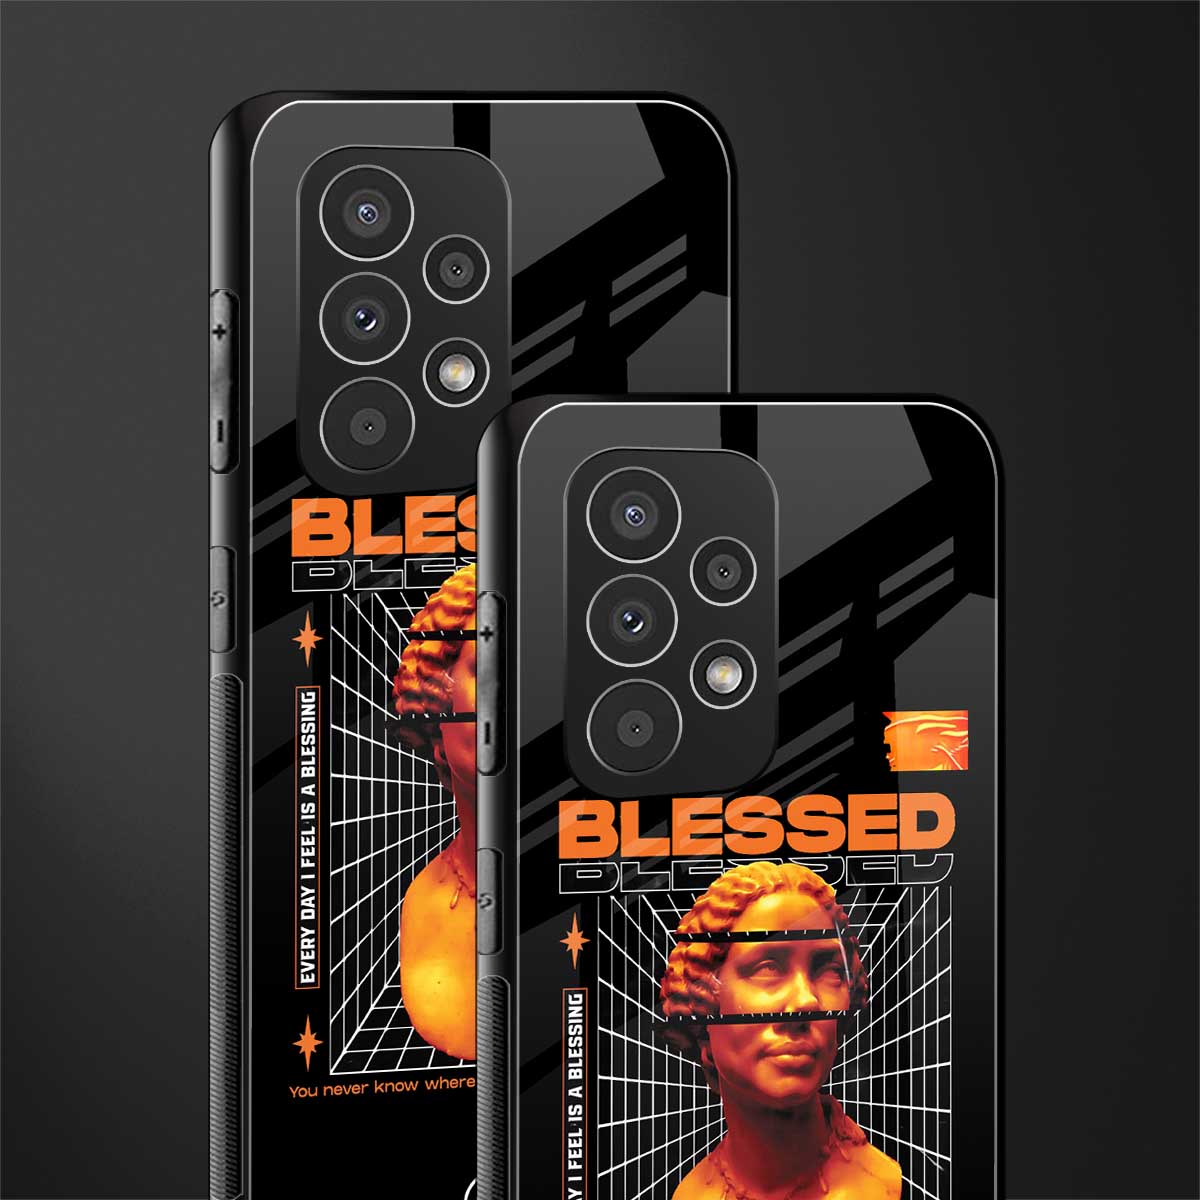 blessing back phone cover | glass case for samsung galaxy a23